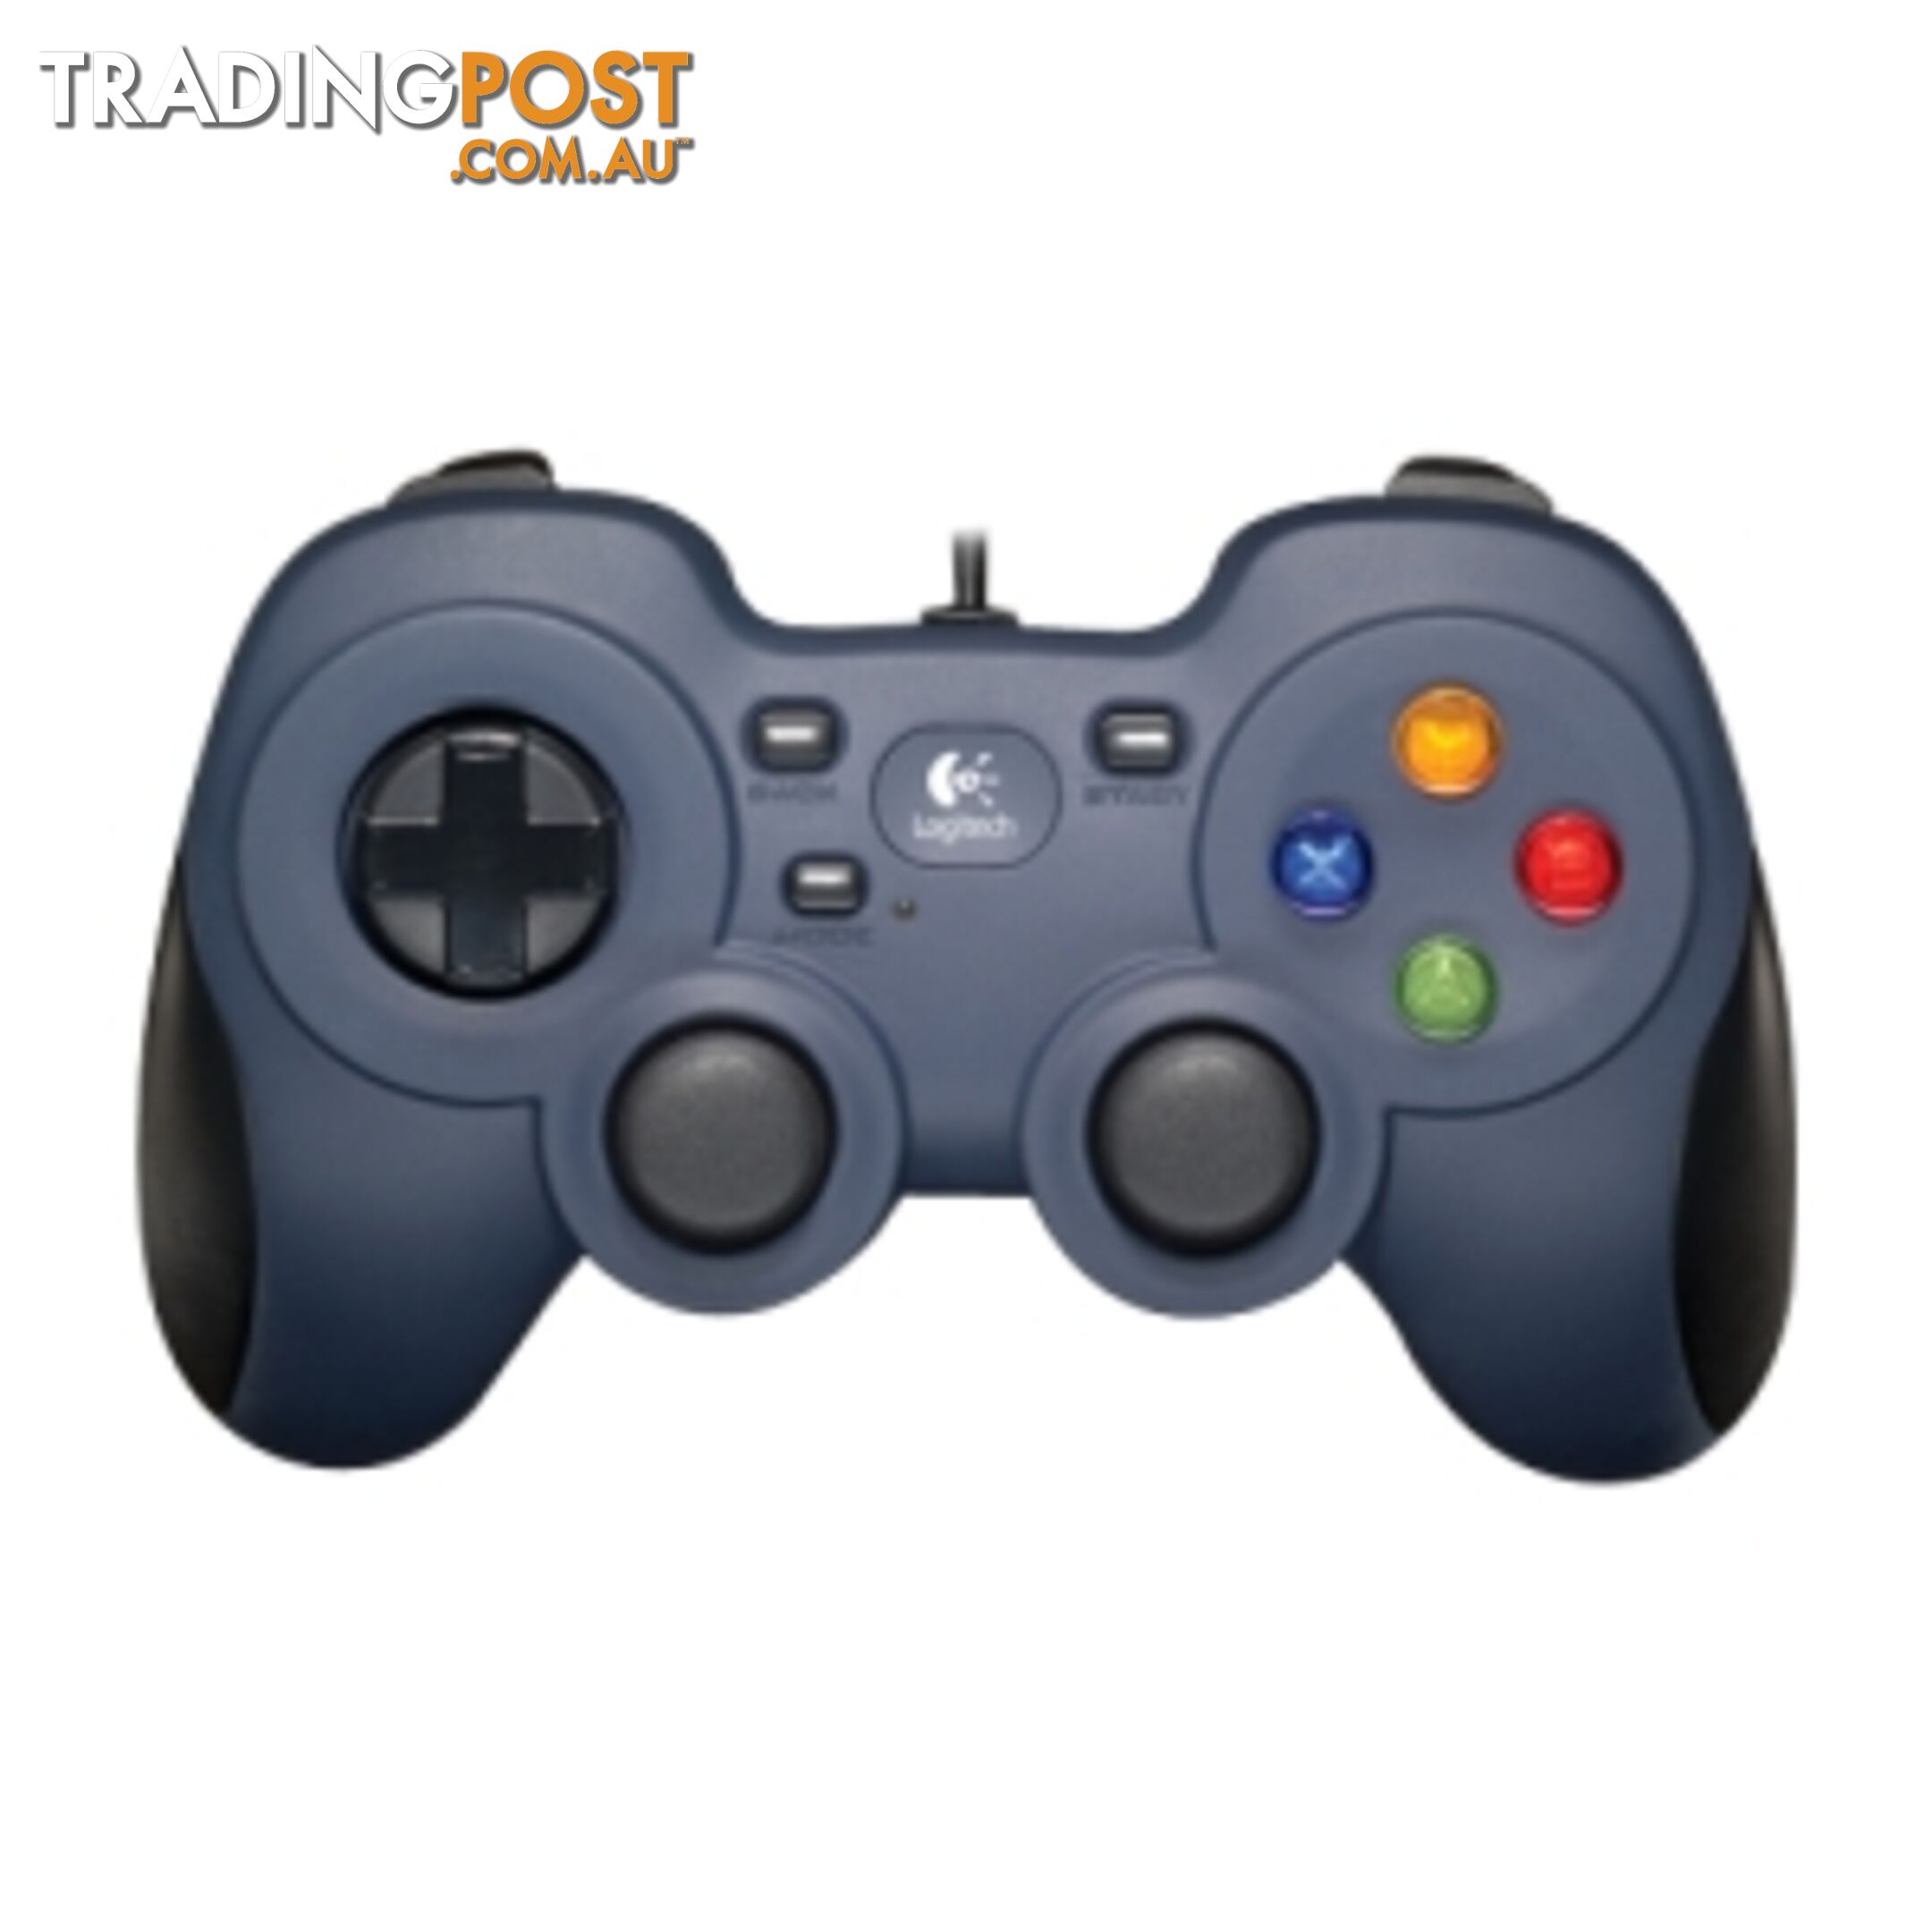 Logitech F310 Gamepad For PC 8-way D-pad Sports Mode Work with Android TV Comfortable grip 1.8m cord Steam big picture - OLT-F310